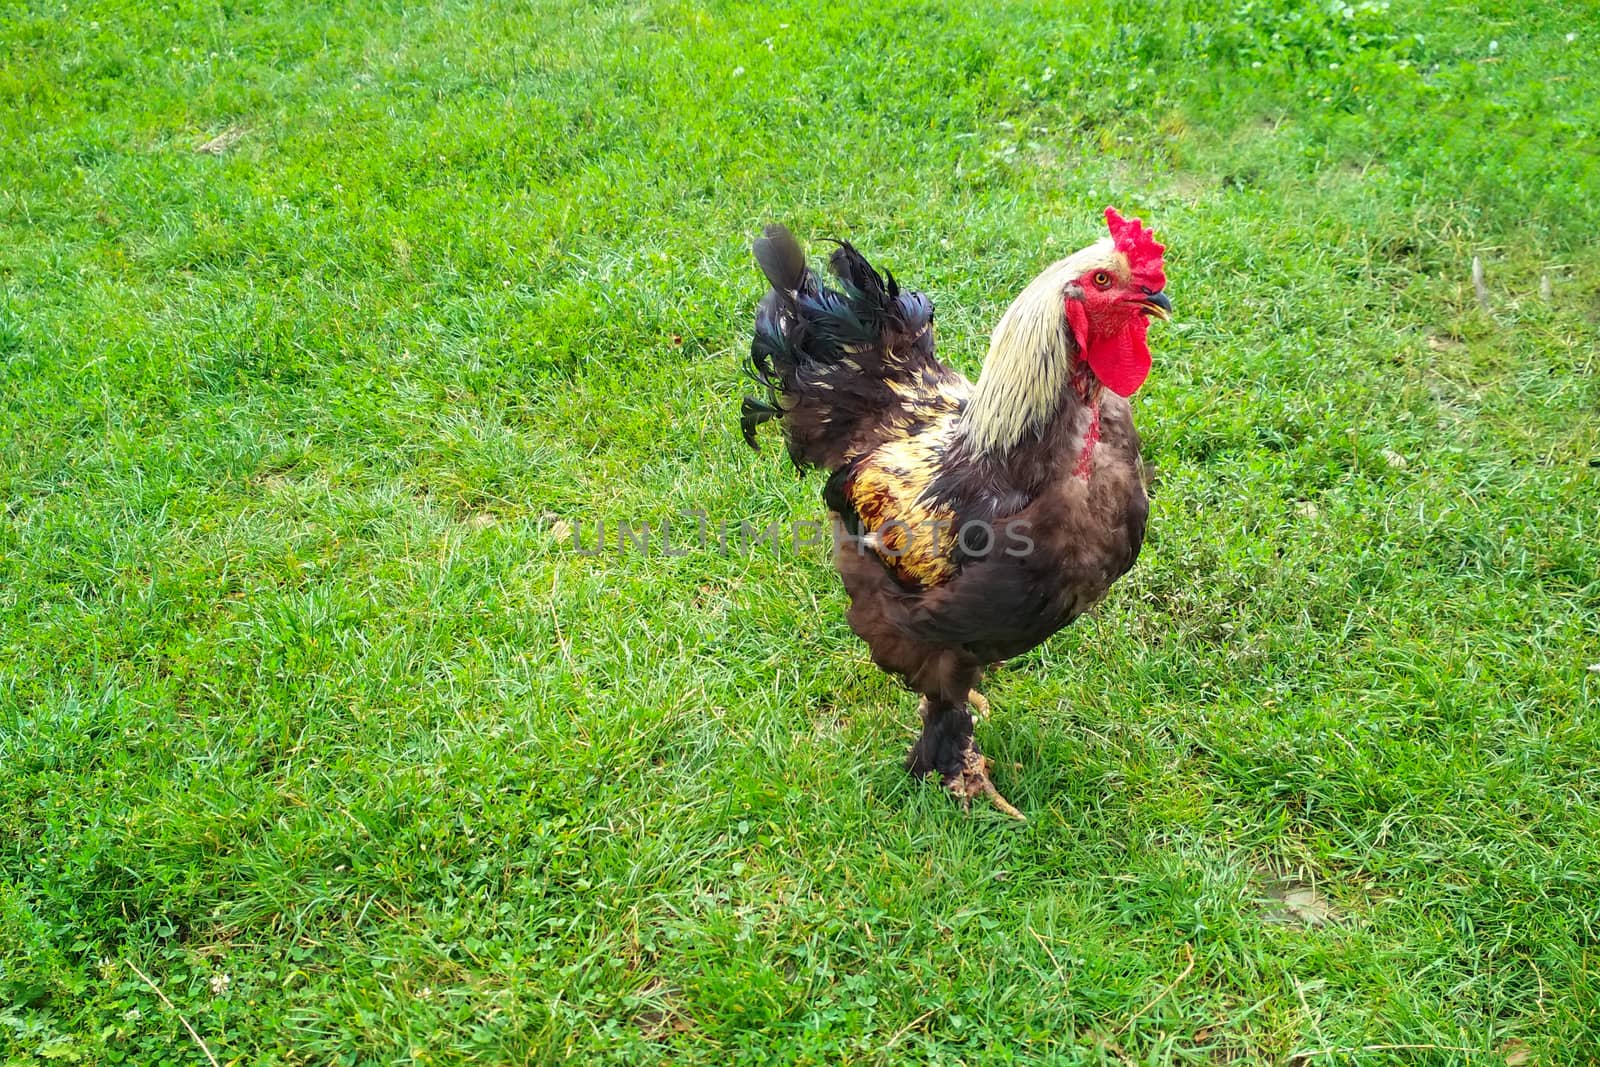 Cock flashy breed Brama, grazing on the green lawn. Rooster with black plumage on its paws